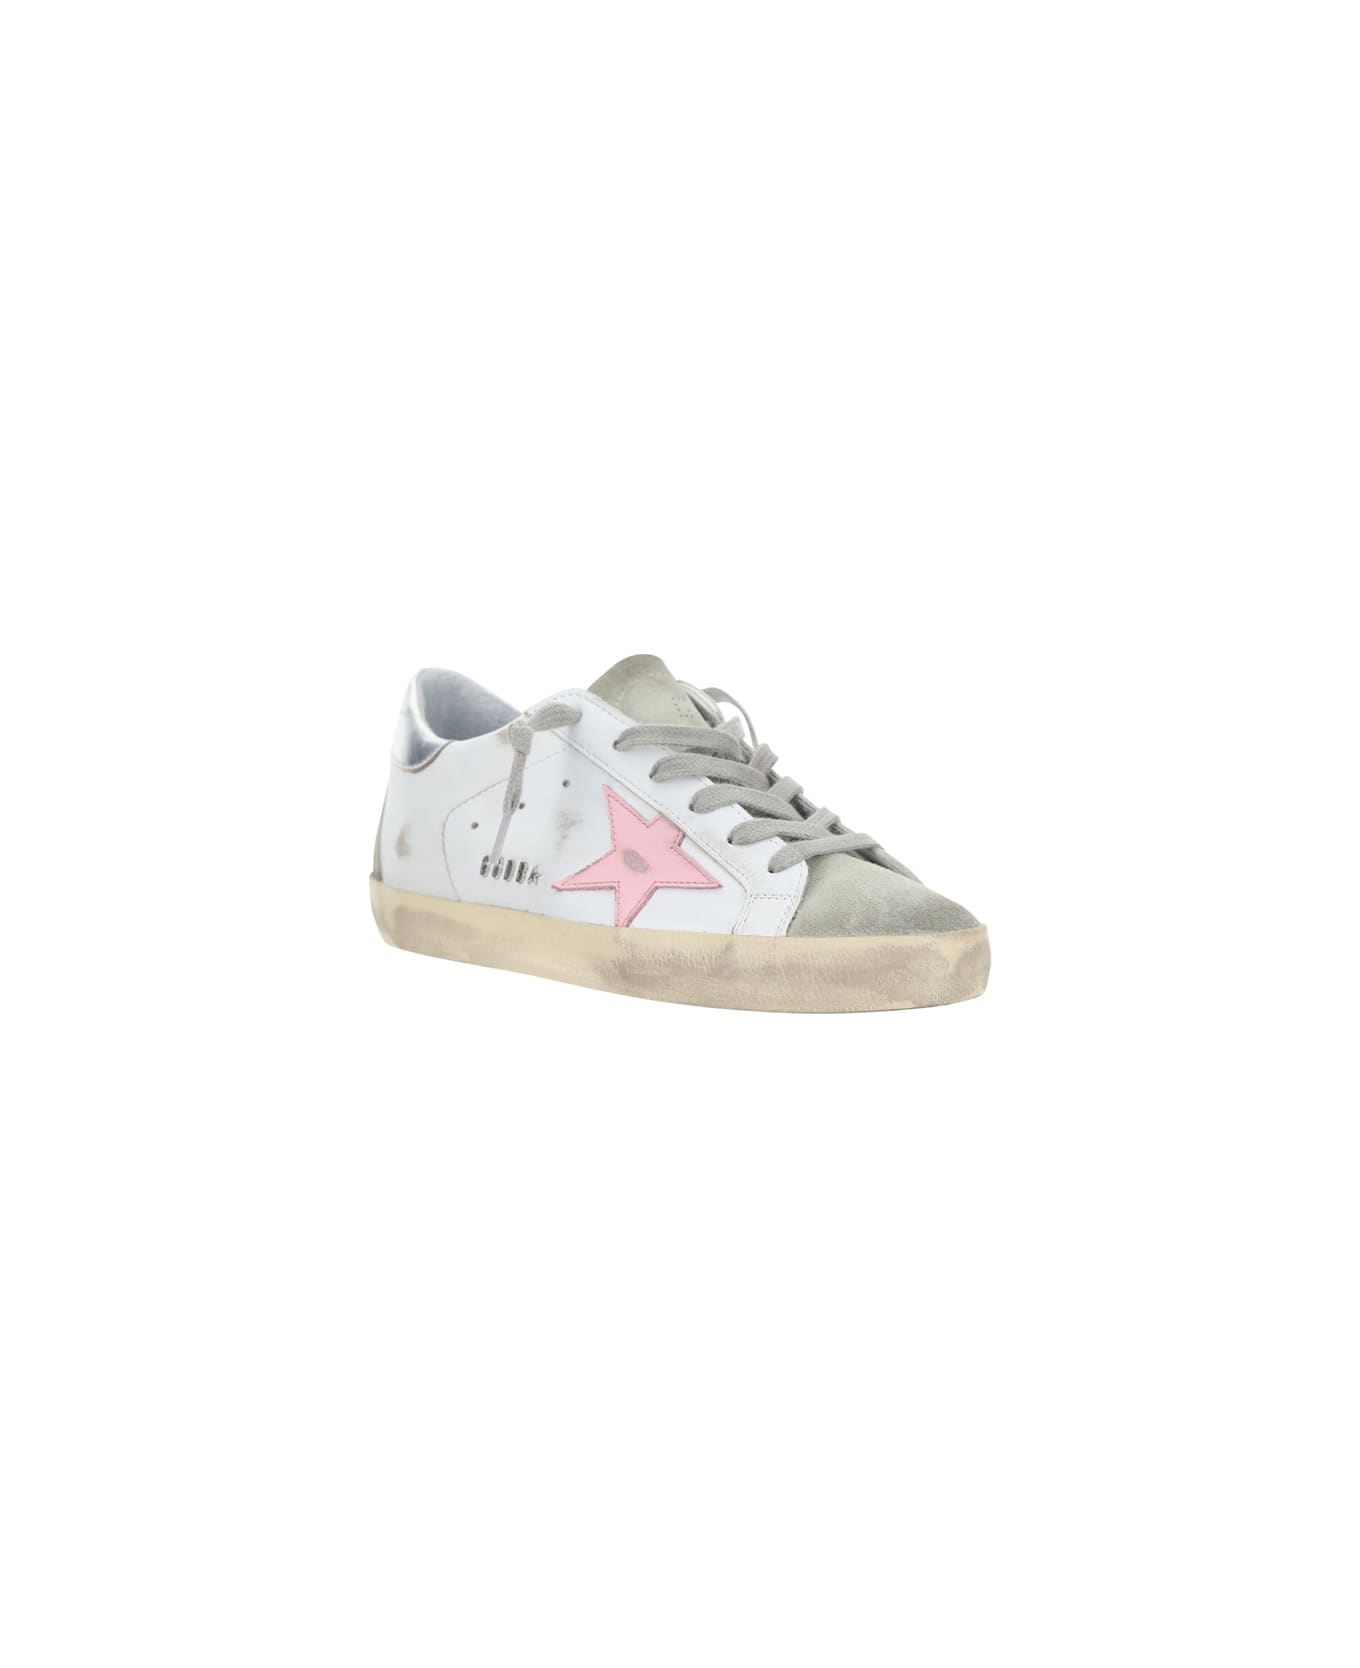 Golden Goose Sneakers - White/ice/orchid Pink/silver